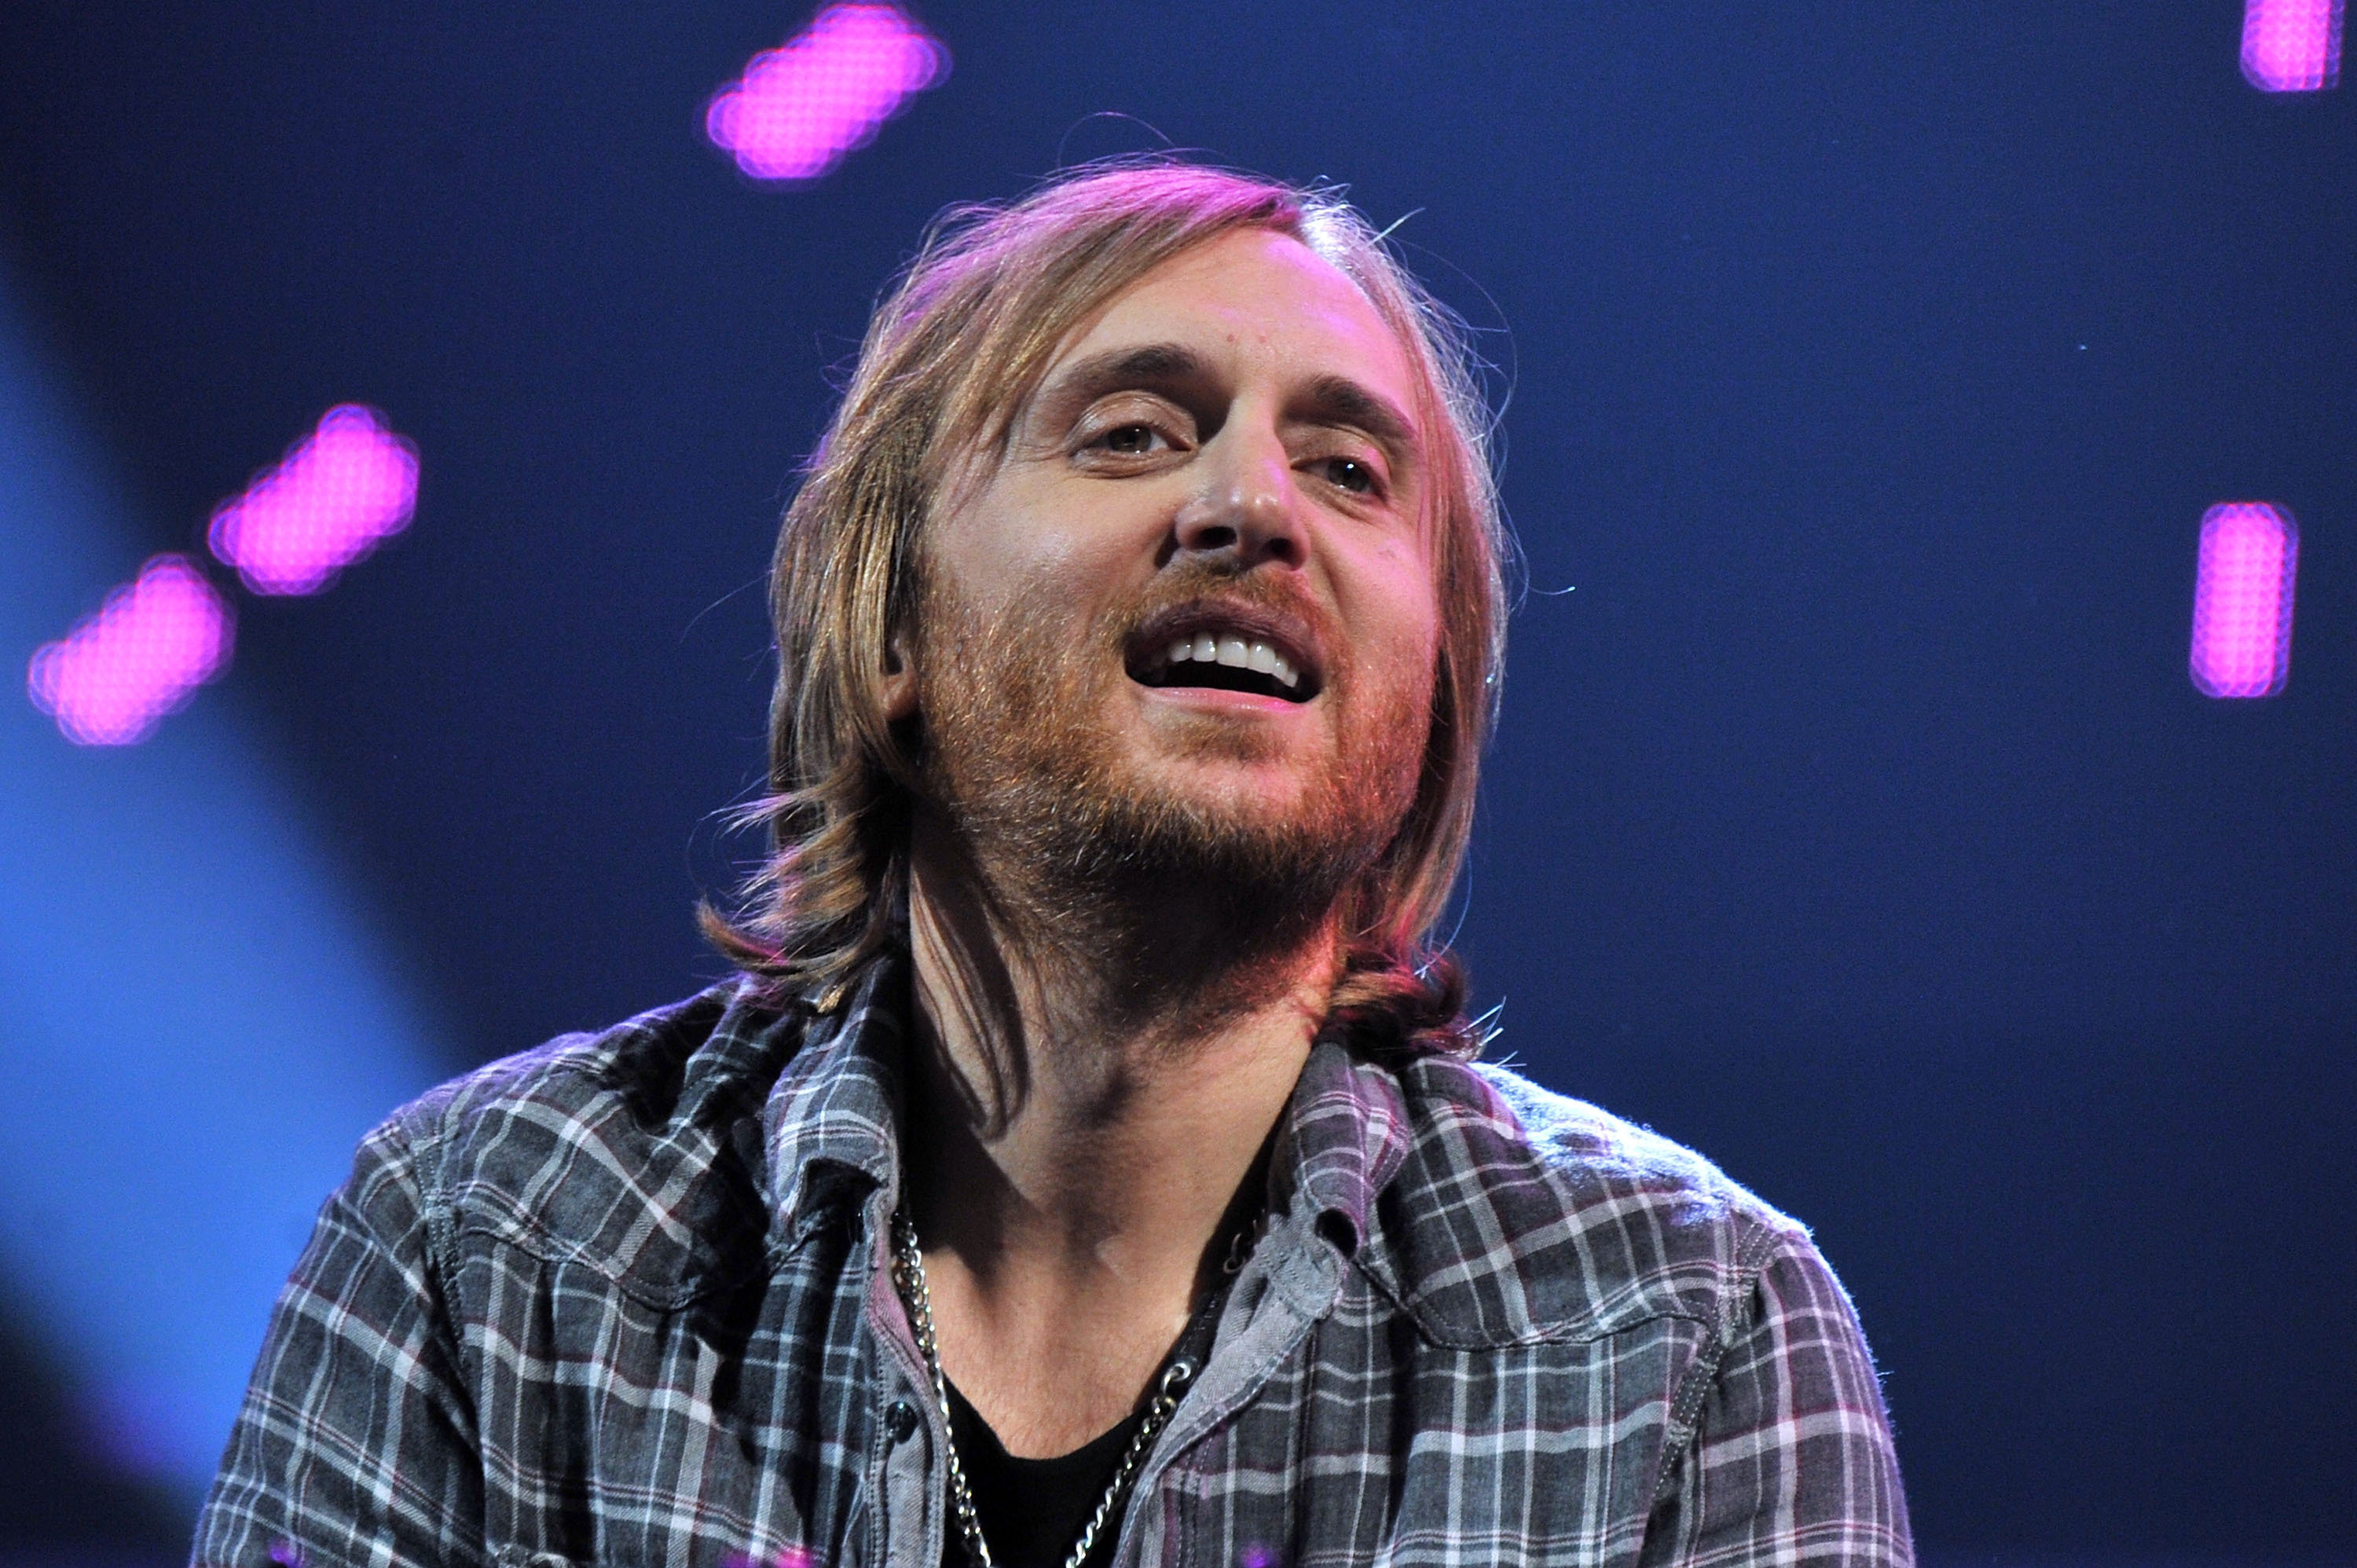 David Guetta Wallpapers Images Photos Pictures Backgrounds3000 x 1996